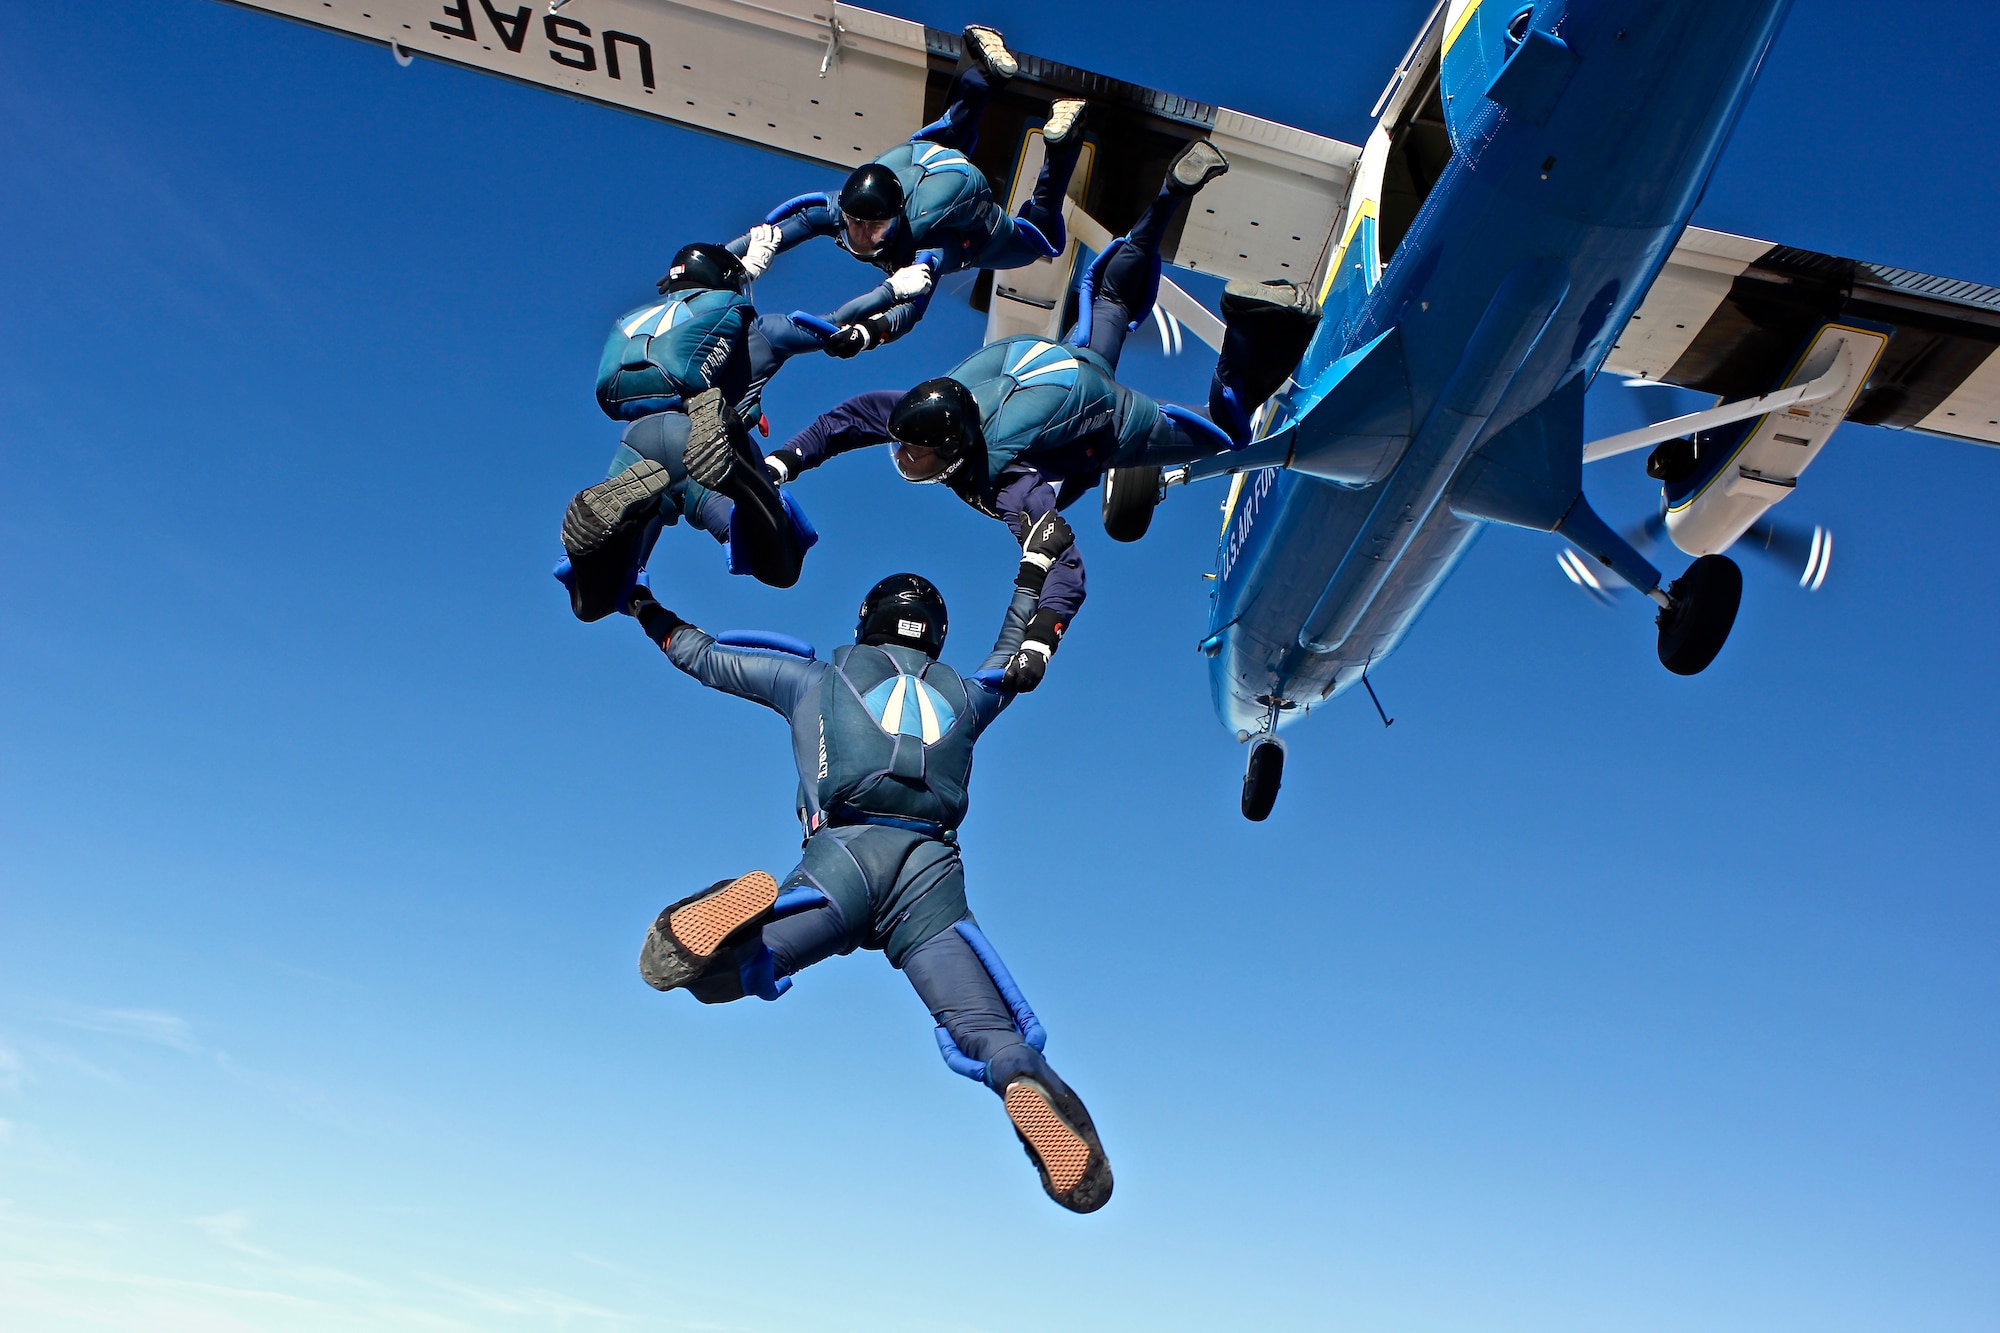 Wings of Blue team members Cadets 1st Class Jeff Herrala, Chad Sufficool,
Lance Dutton and Patrick Connolly, jump from an aircraft during the
Collegiate Parachuting Championships in Lake Wales Florida, Dec. 29 - Jan.
2. Wings of blue is the U.S. Air Force Academy's  parachute team. The team
won 26 medals at the event. (U.S. Air Force photo)  
